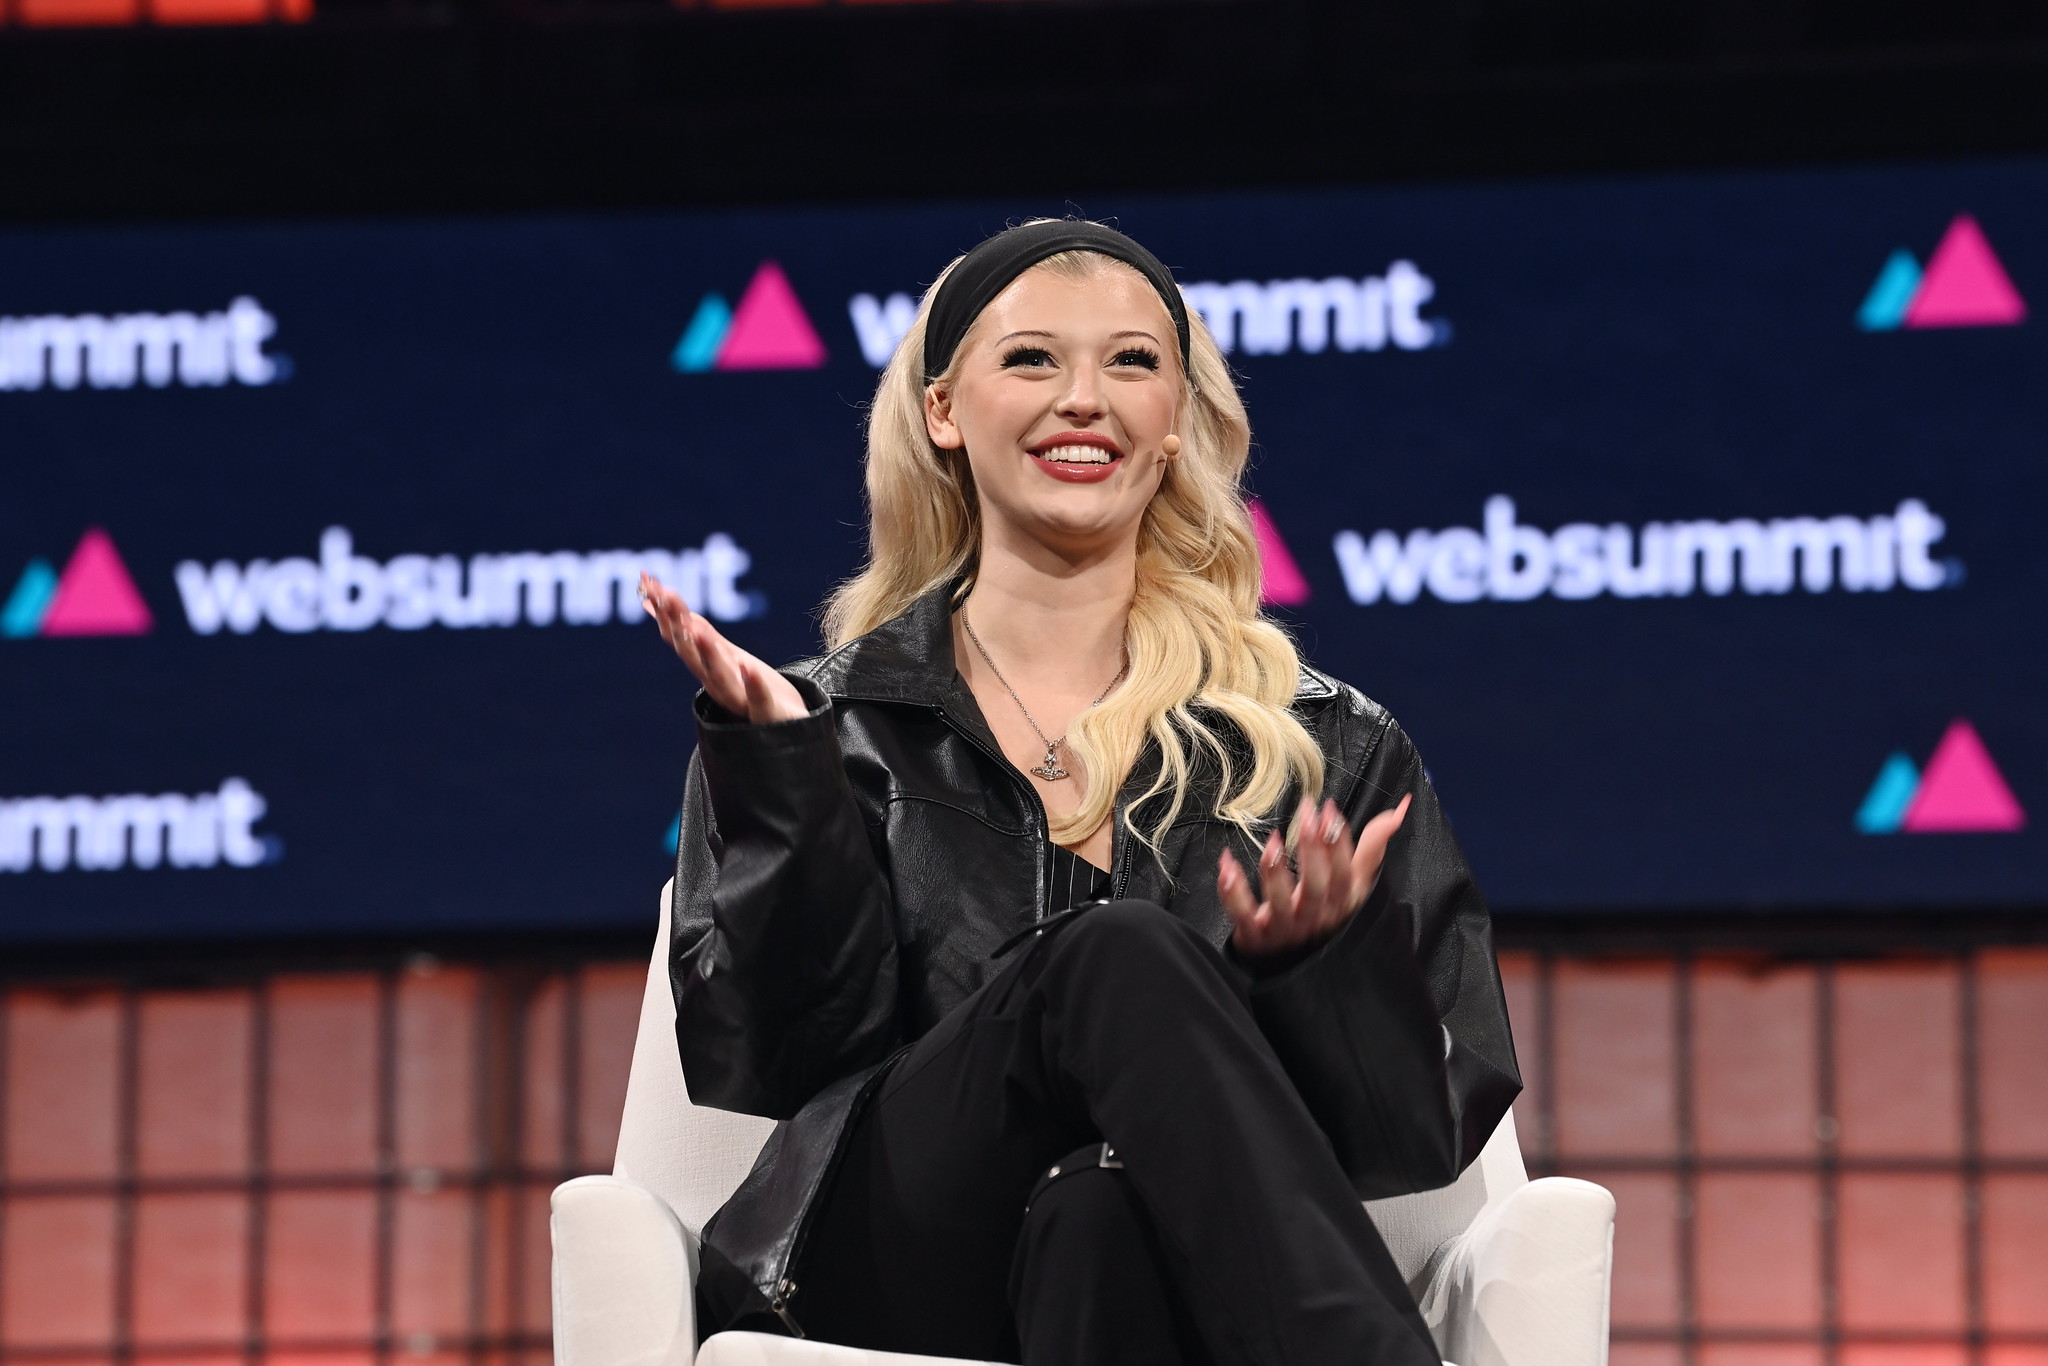 A photograph of Loren Gray, social media personality and songwriter, speaking on Centre Stage at Web Summit. Loren appears to be speaking to a crowd, and is sitting on a chair. Loren is gesturing with hands. The Web Summit logo is visible in the background.